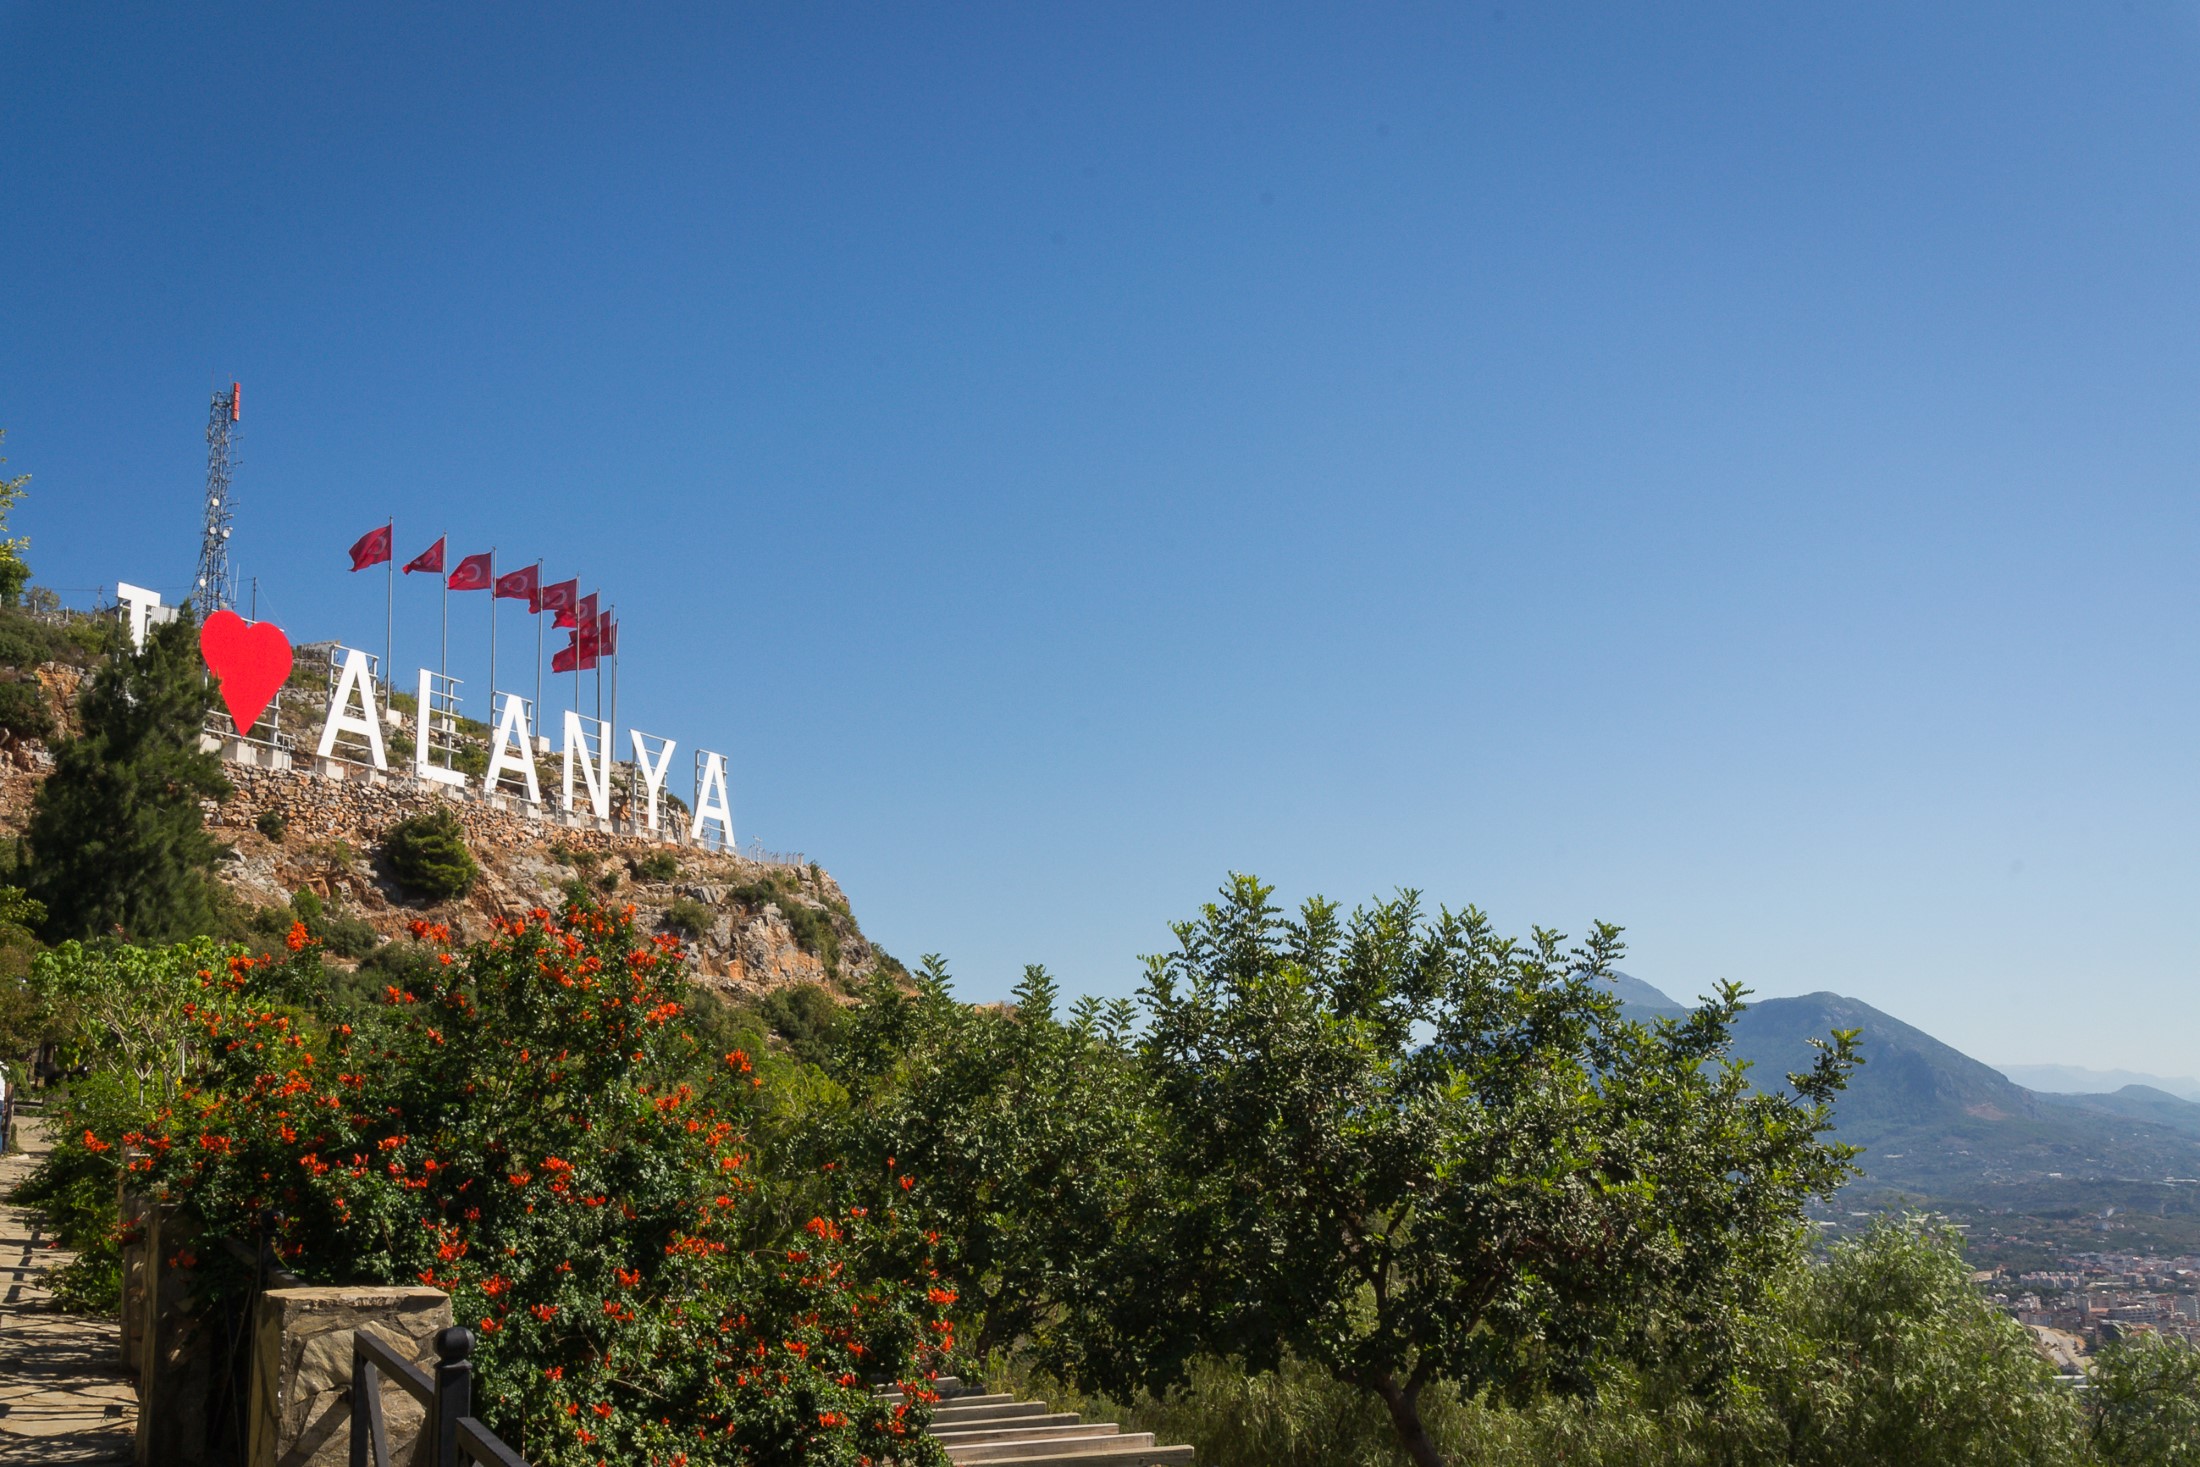 Looked at the site of the city of Alanya with the inscription "I love Alanya".